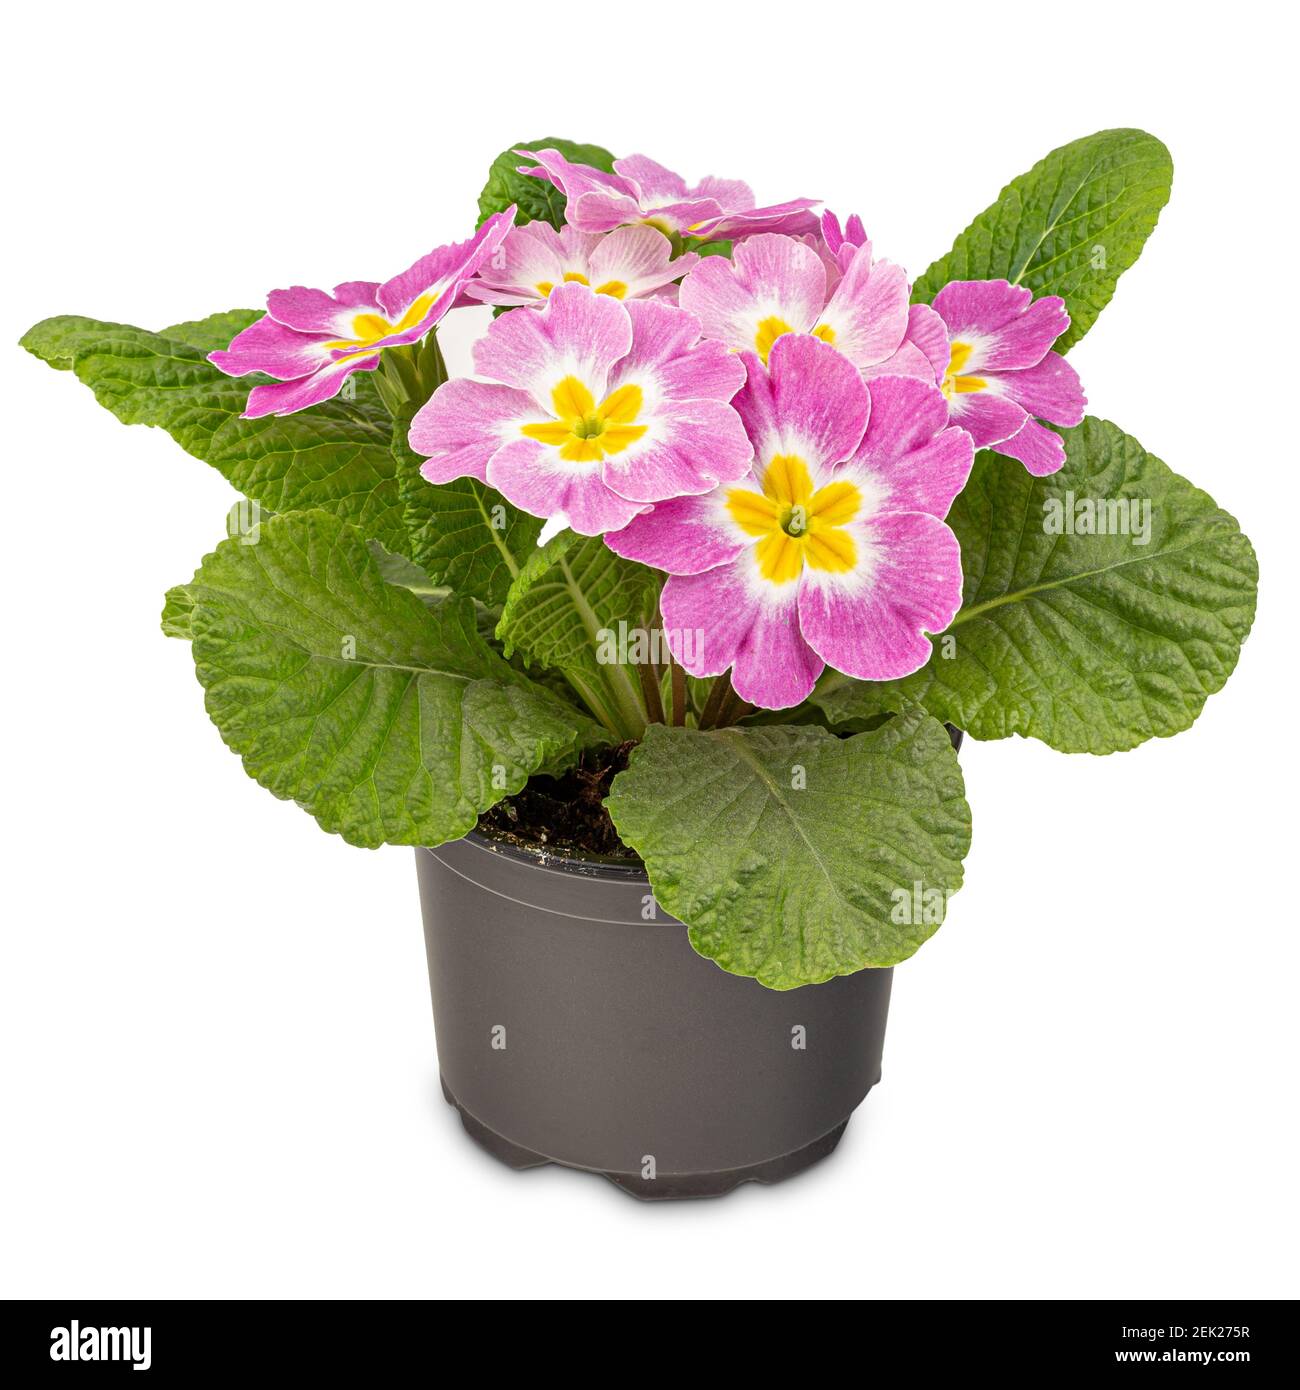 Light pink primula with yellow central disk in flowerpot on white background Stock Photo